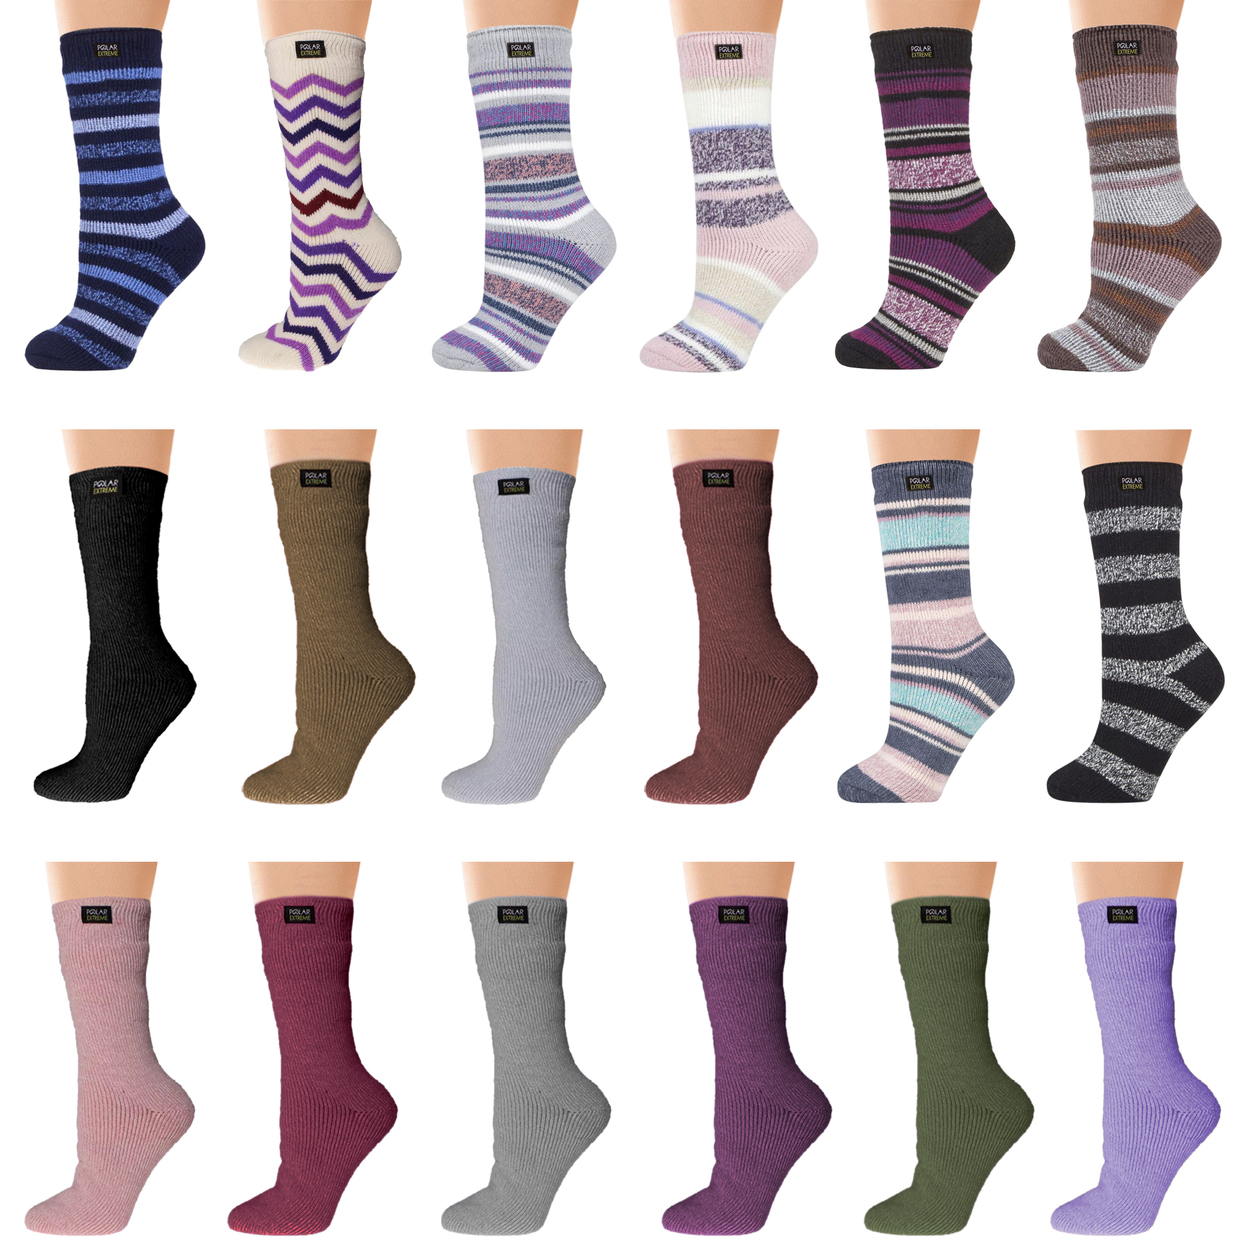 Multi-Pairs: Women's Polar Extreme Insulated Thermal Ultra-Soft Winter Warm Crew Socks - 2-pack